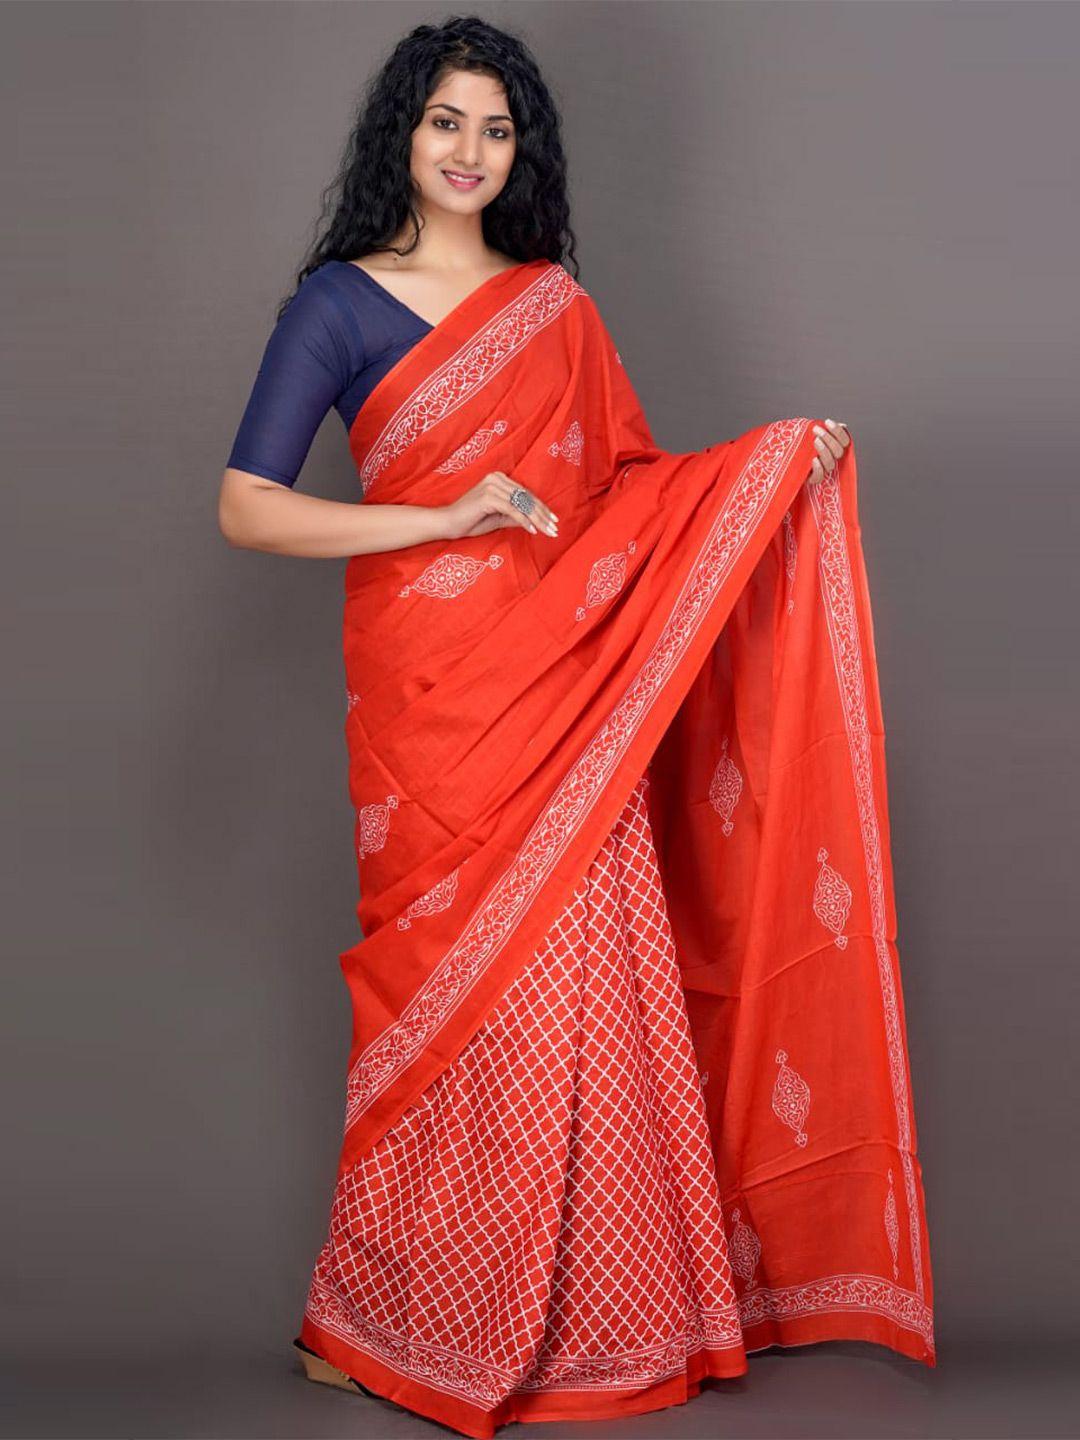 jalther ethnic motifs printed pure cotton saree